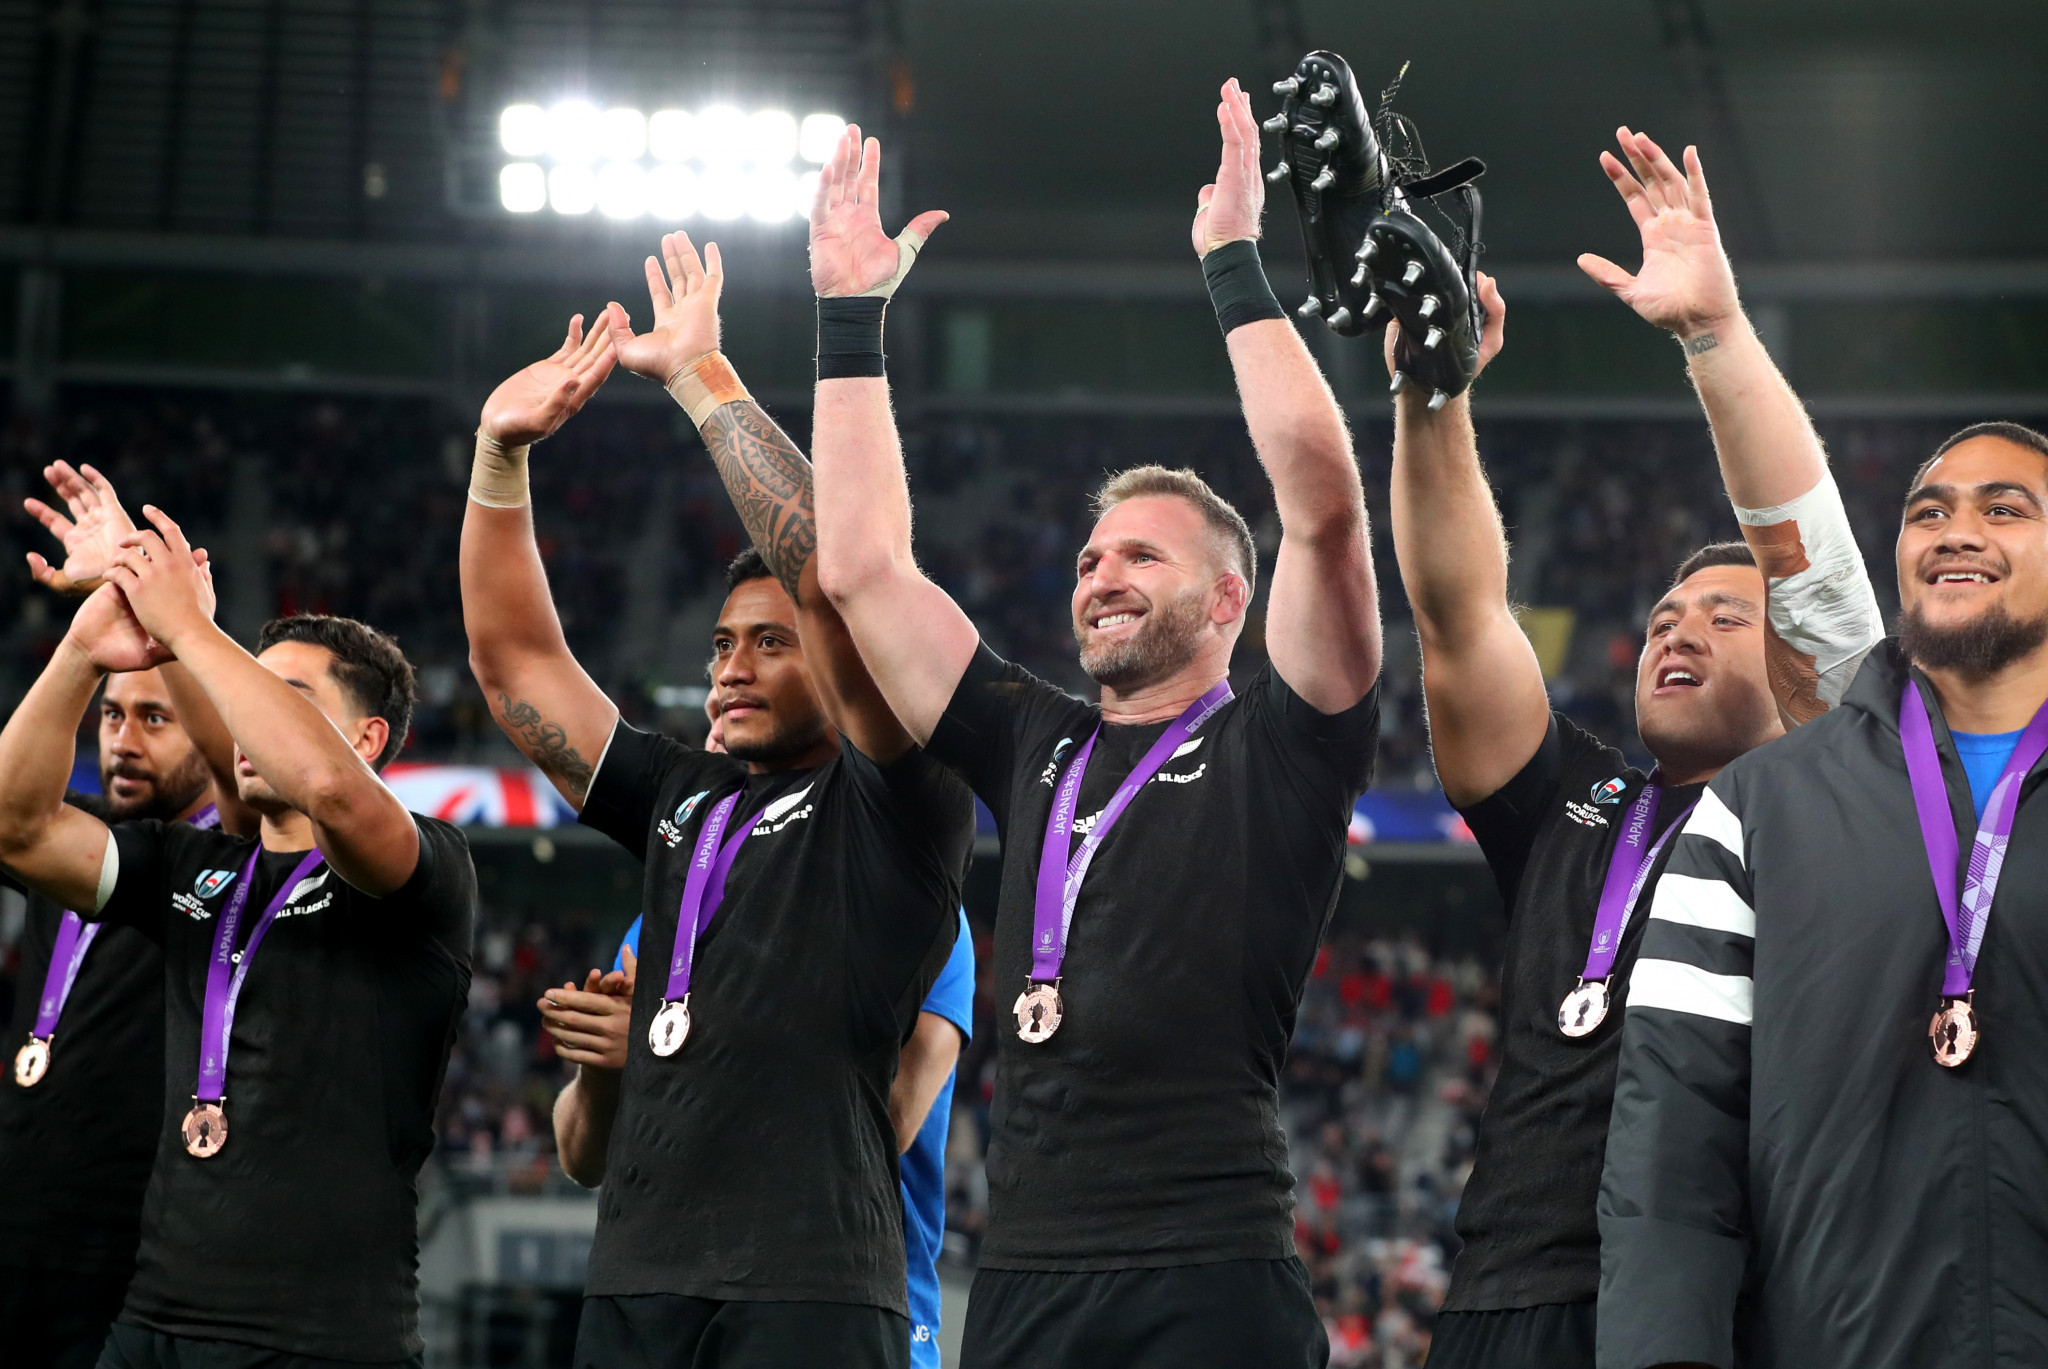 New Zealand claim bronze as preparations build for Rugby World Cup Final 